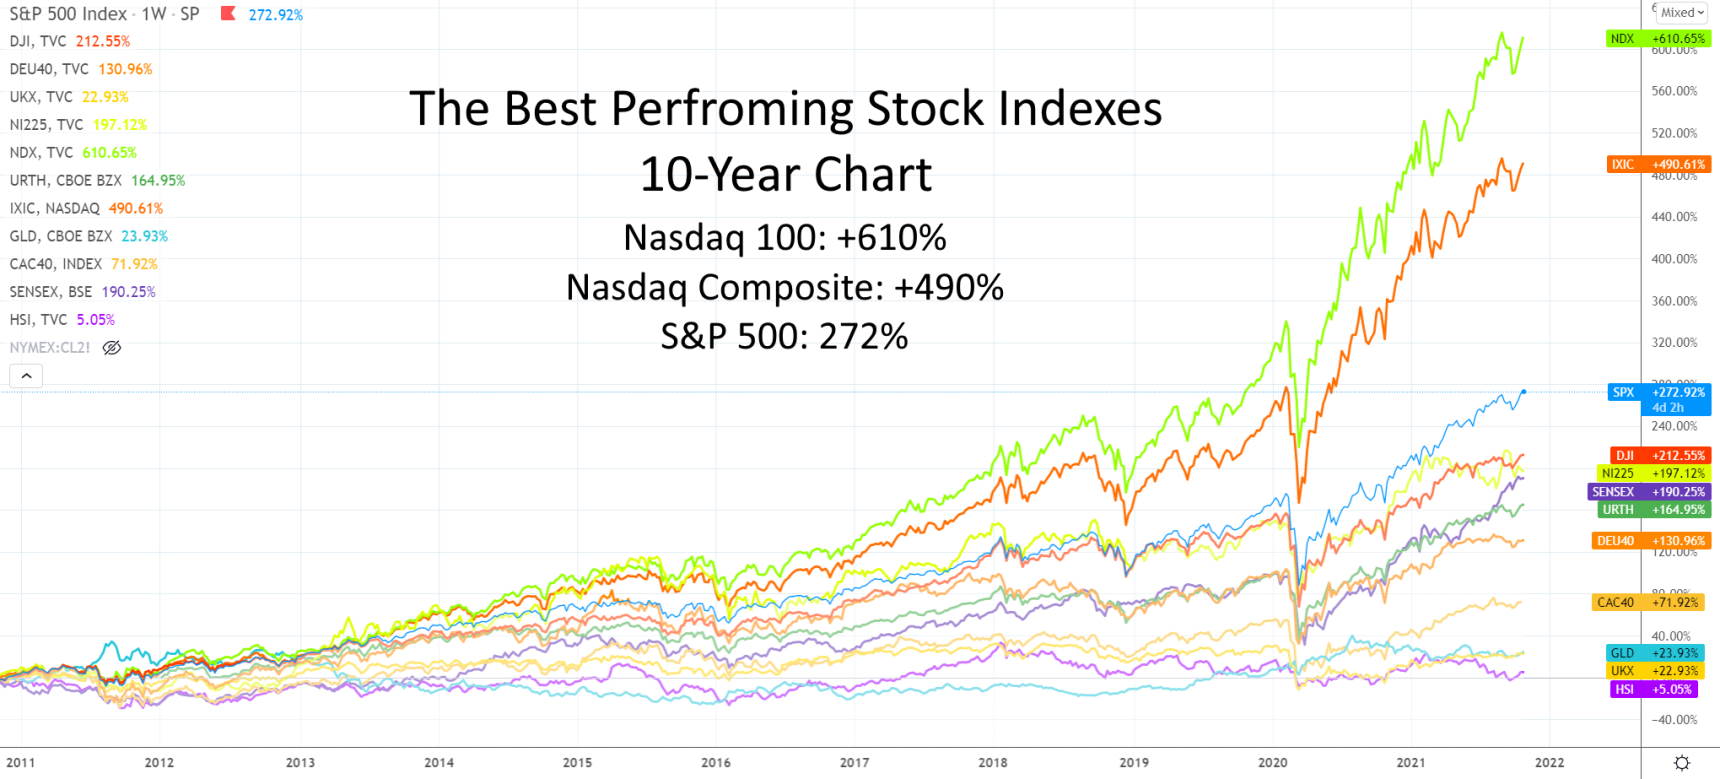 The best index funds to invest in long-term. Top Performing Stock Index Funds: 10-Year Chart to 2022.